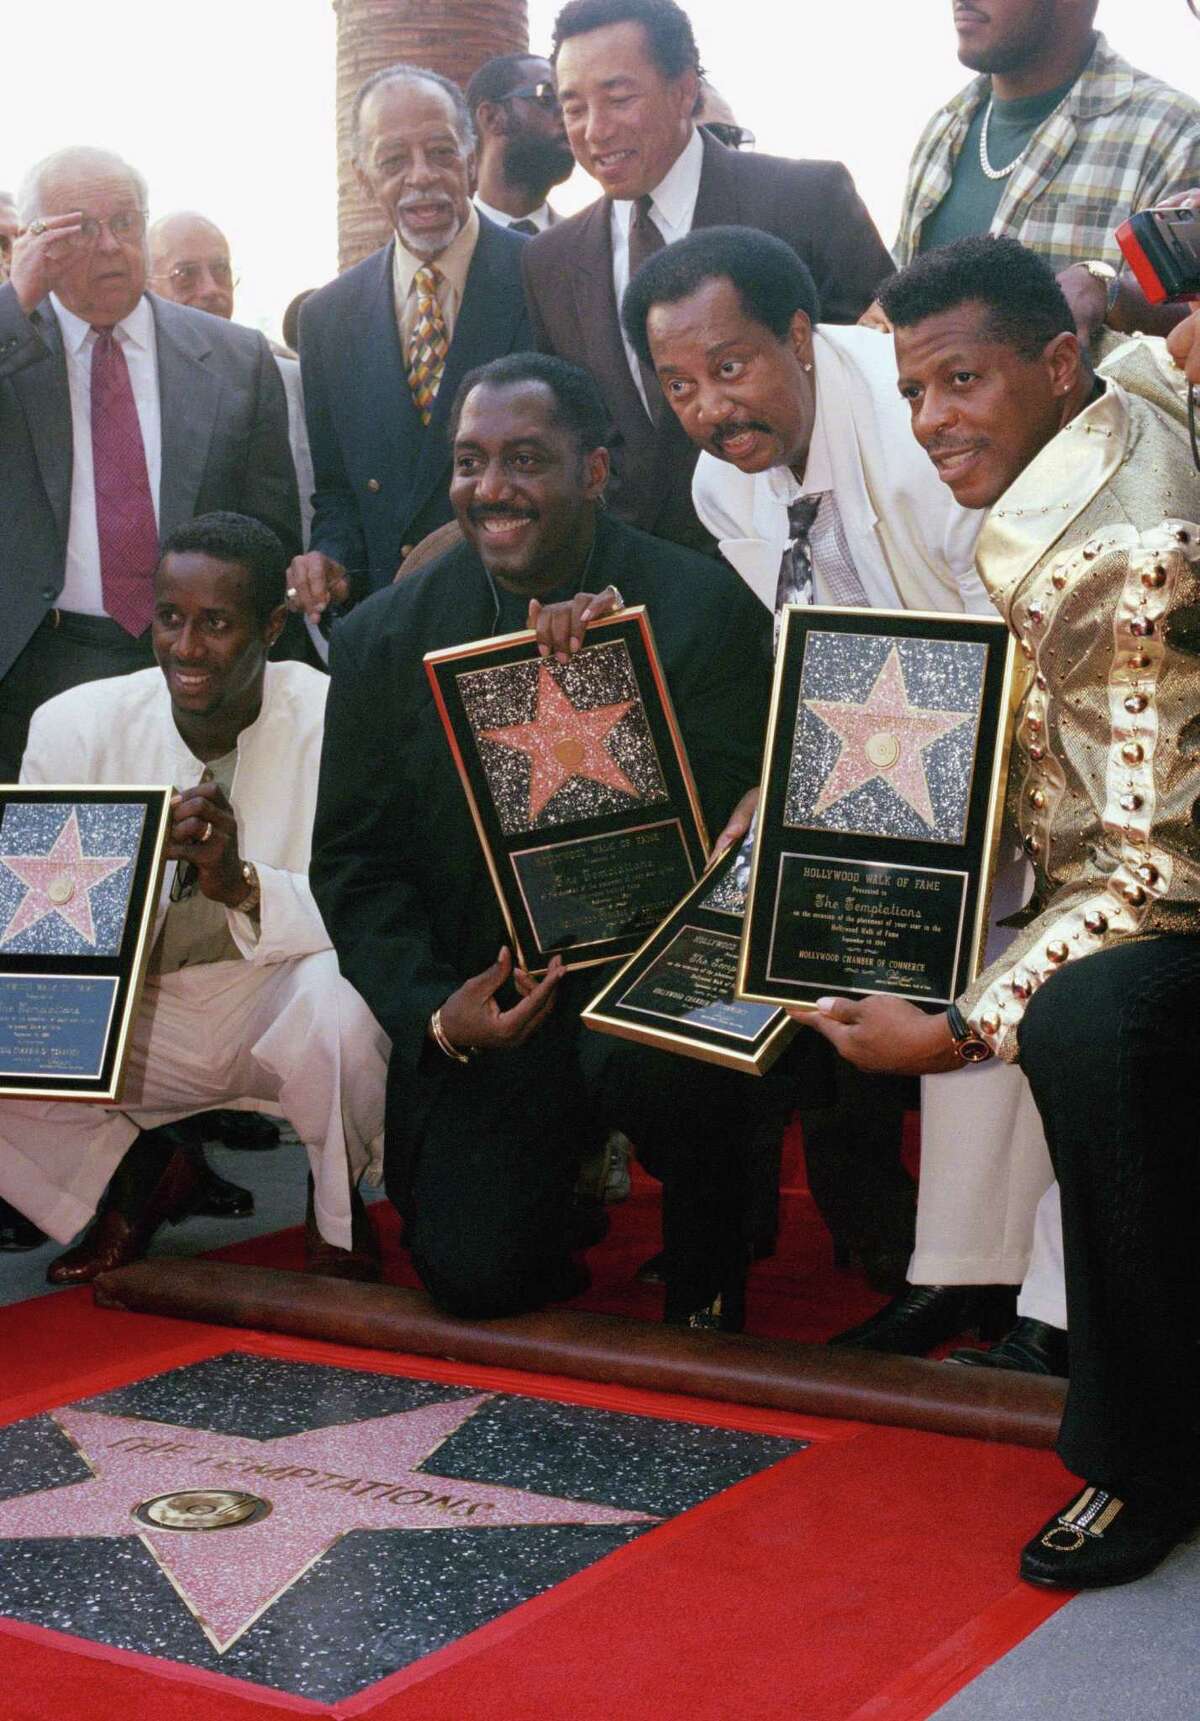 Smokey Robinson, rear, watches as Otis Williams and The Temptations get a star on the Hollywood Walk of Fame in 1994.